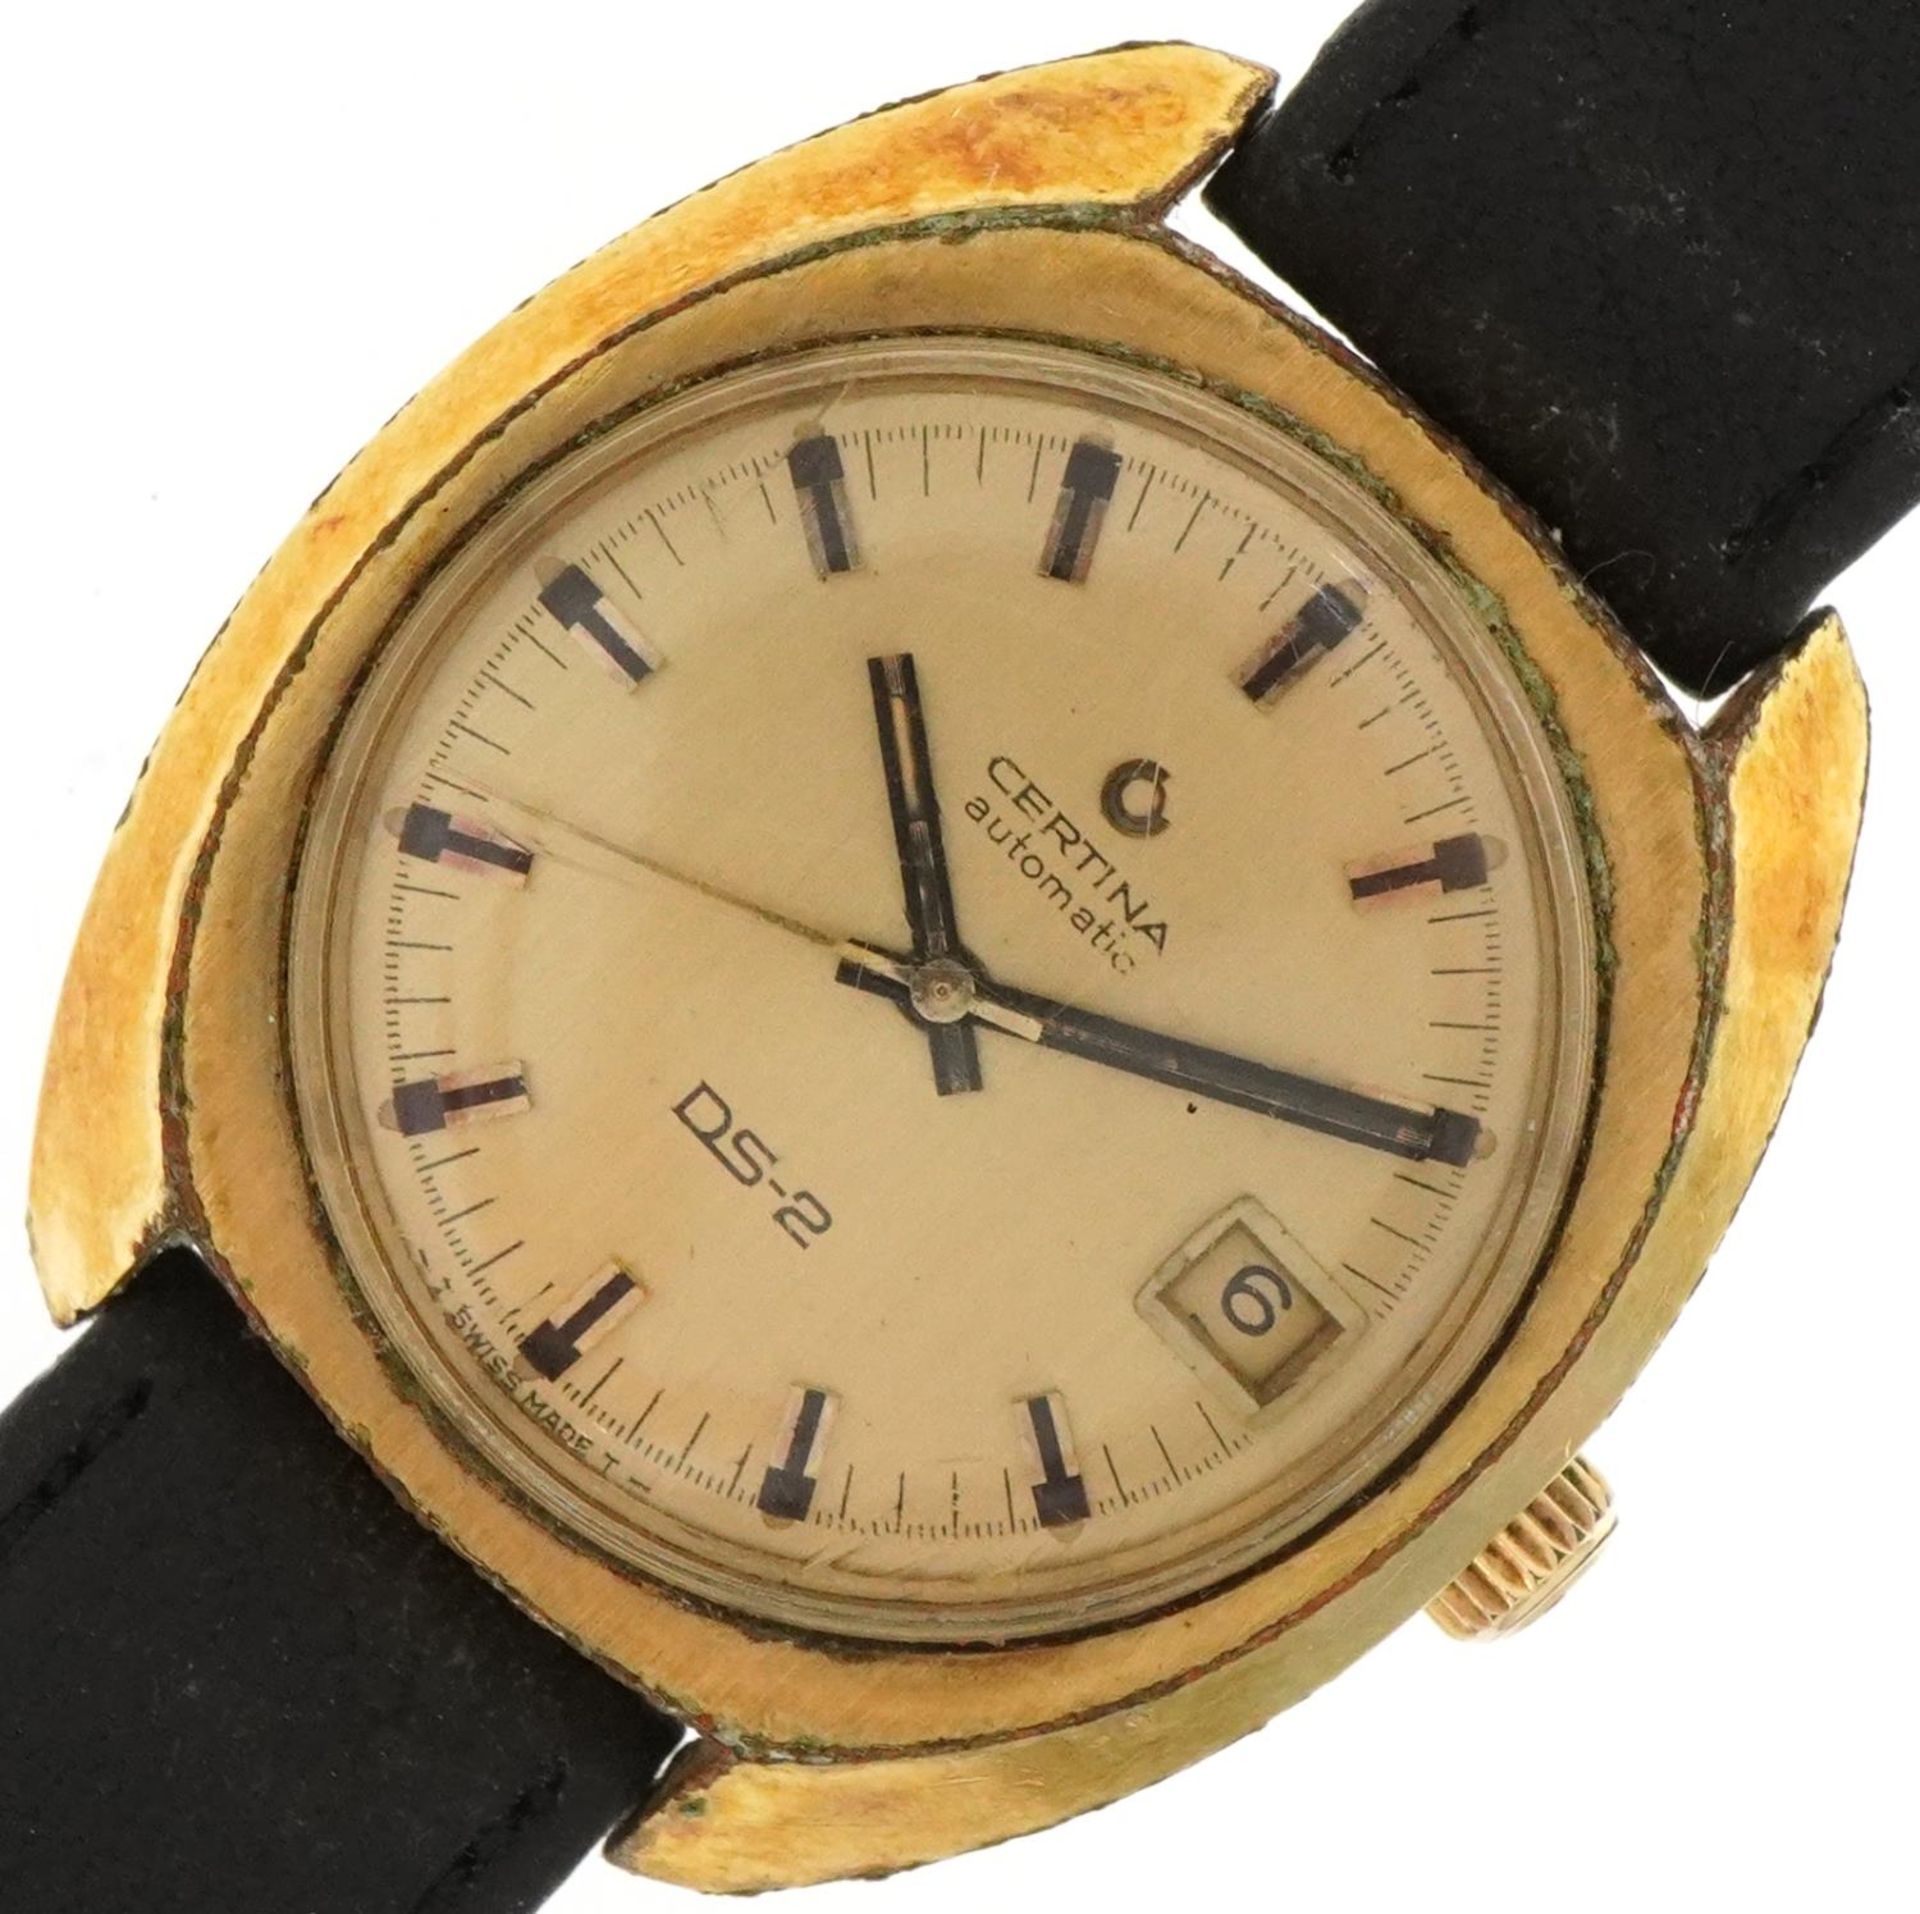 Certina, gentlemen's Certina DS-2 automatic wristwatch having champagne dial with date aperture, the